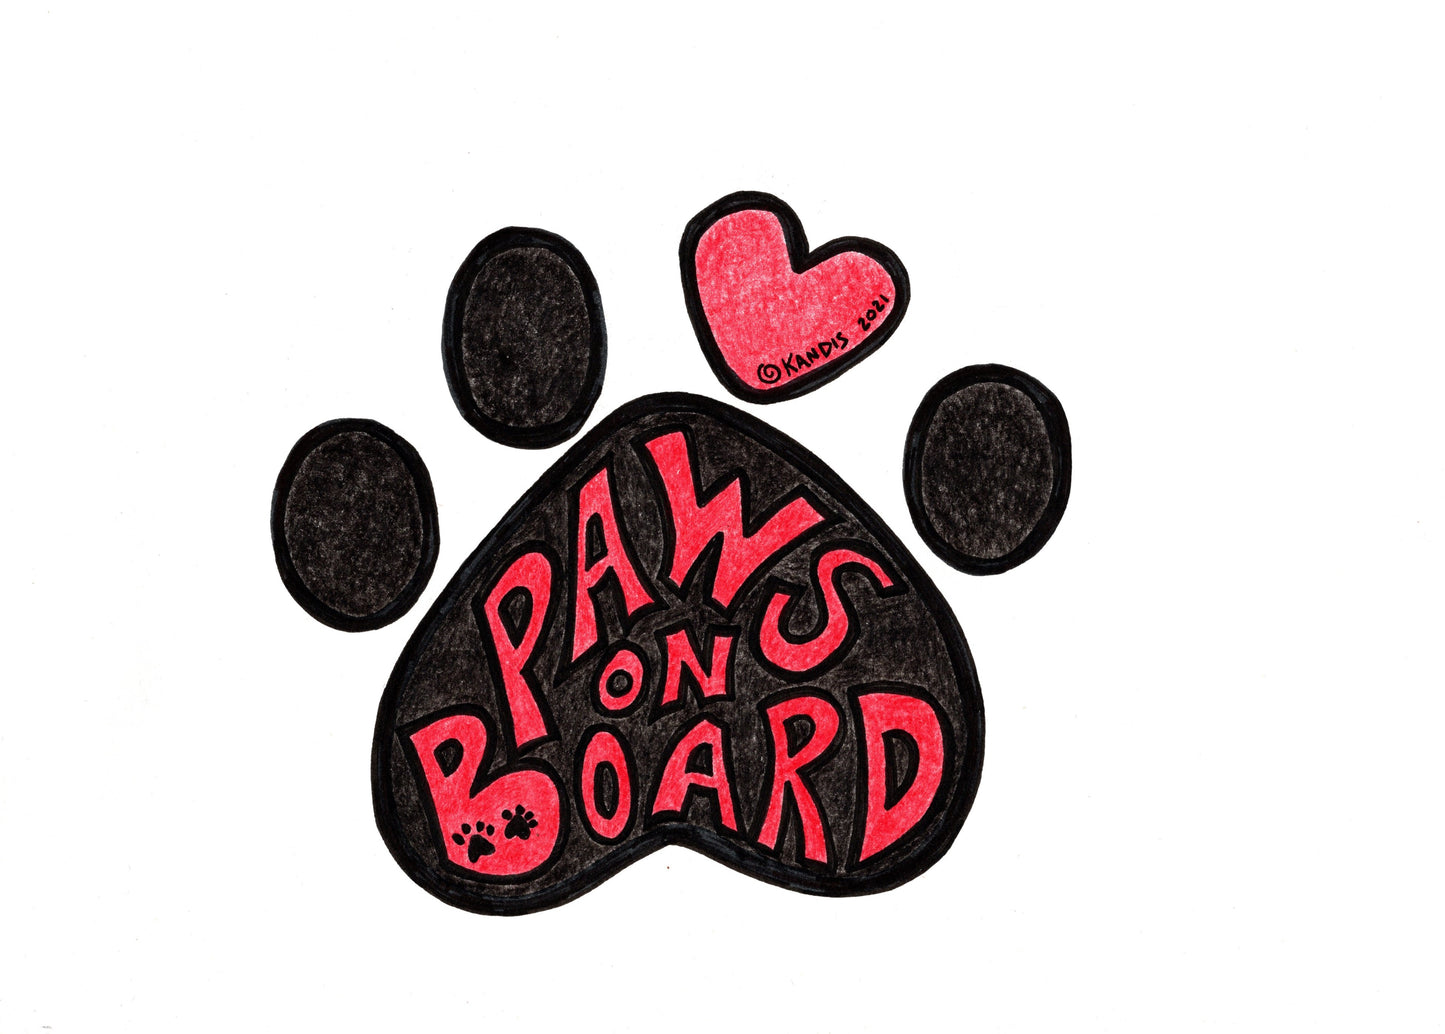 Paws on Board